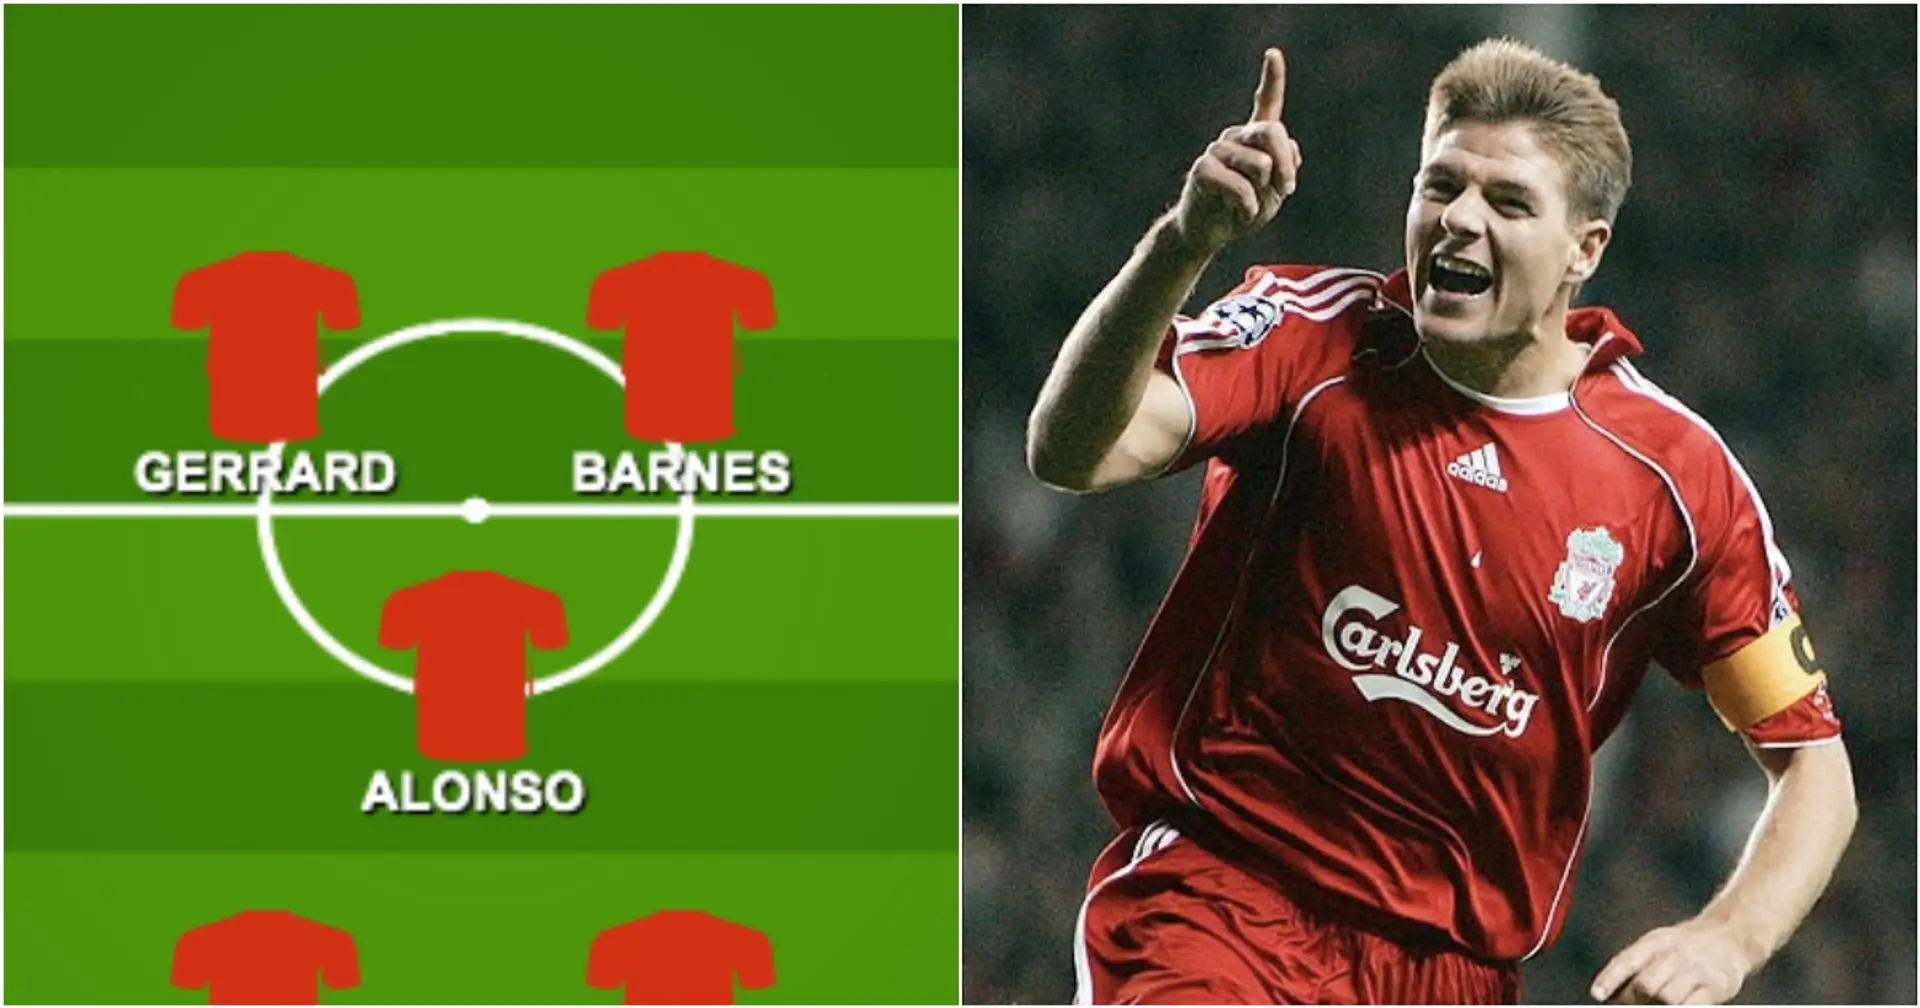 You picked Liverpool's all-time best XI - we draw lineup